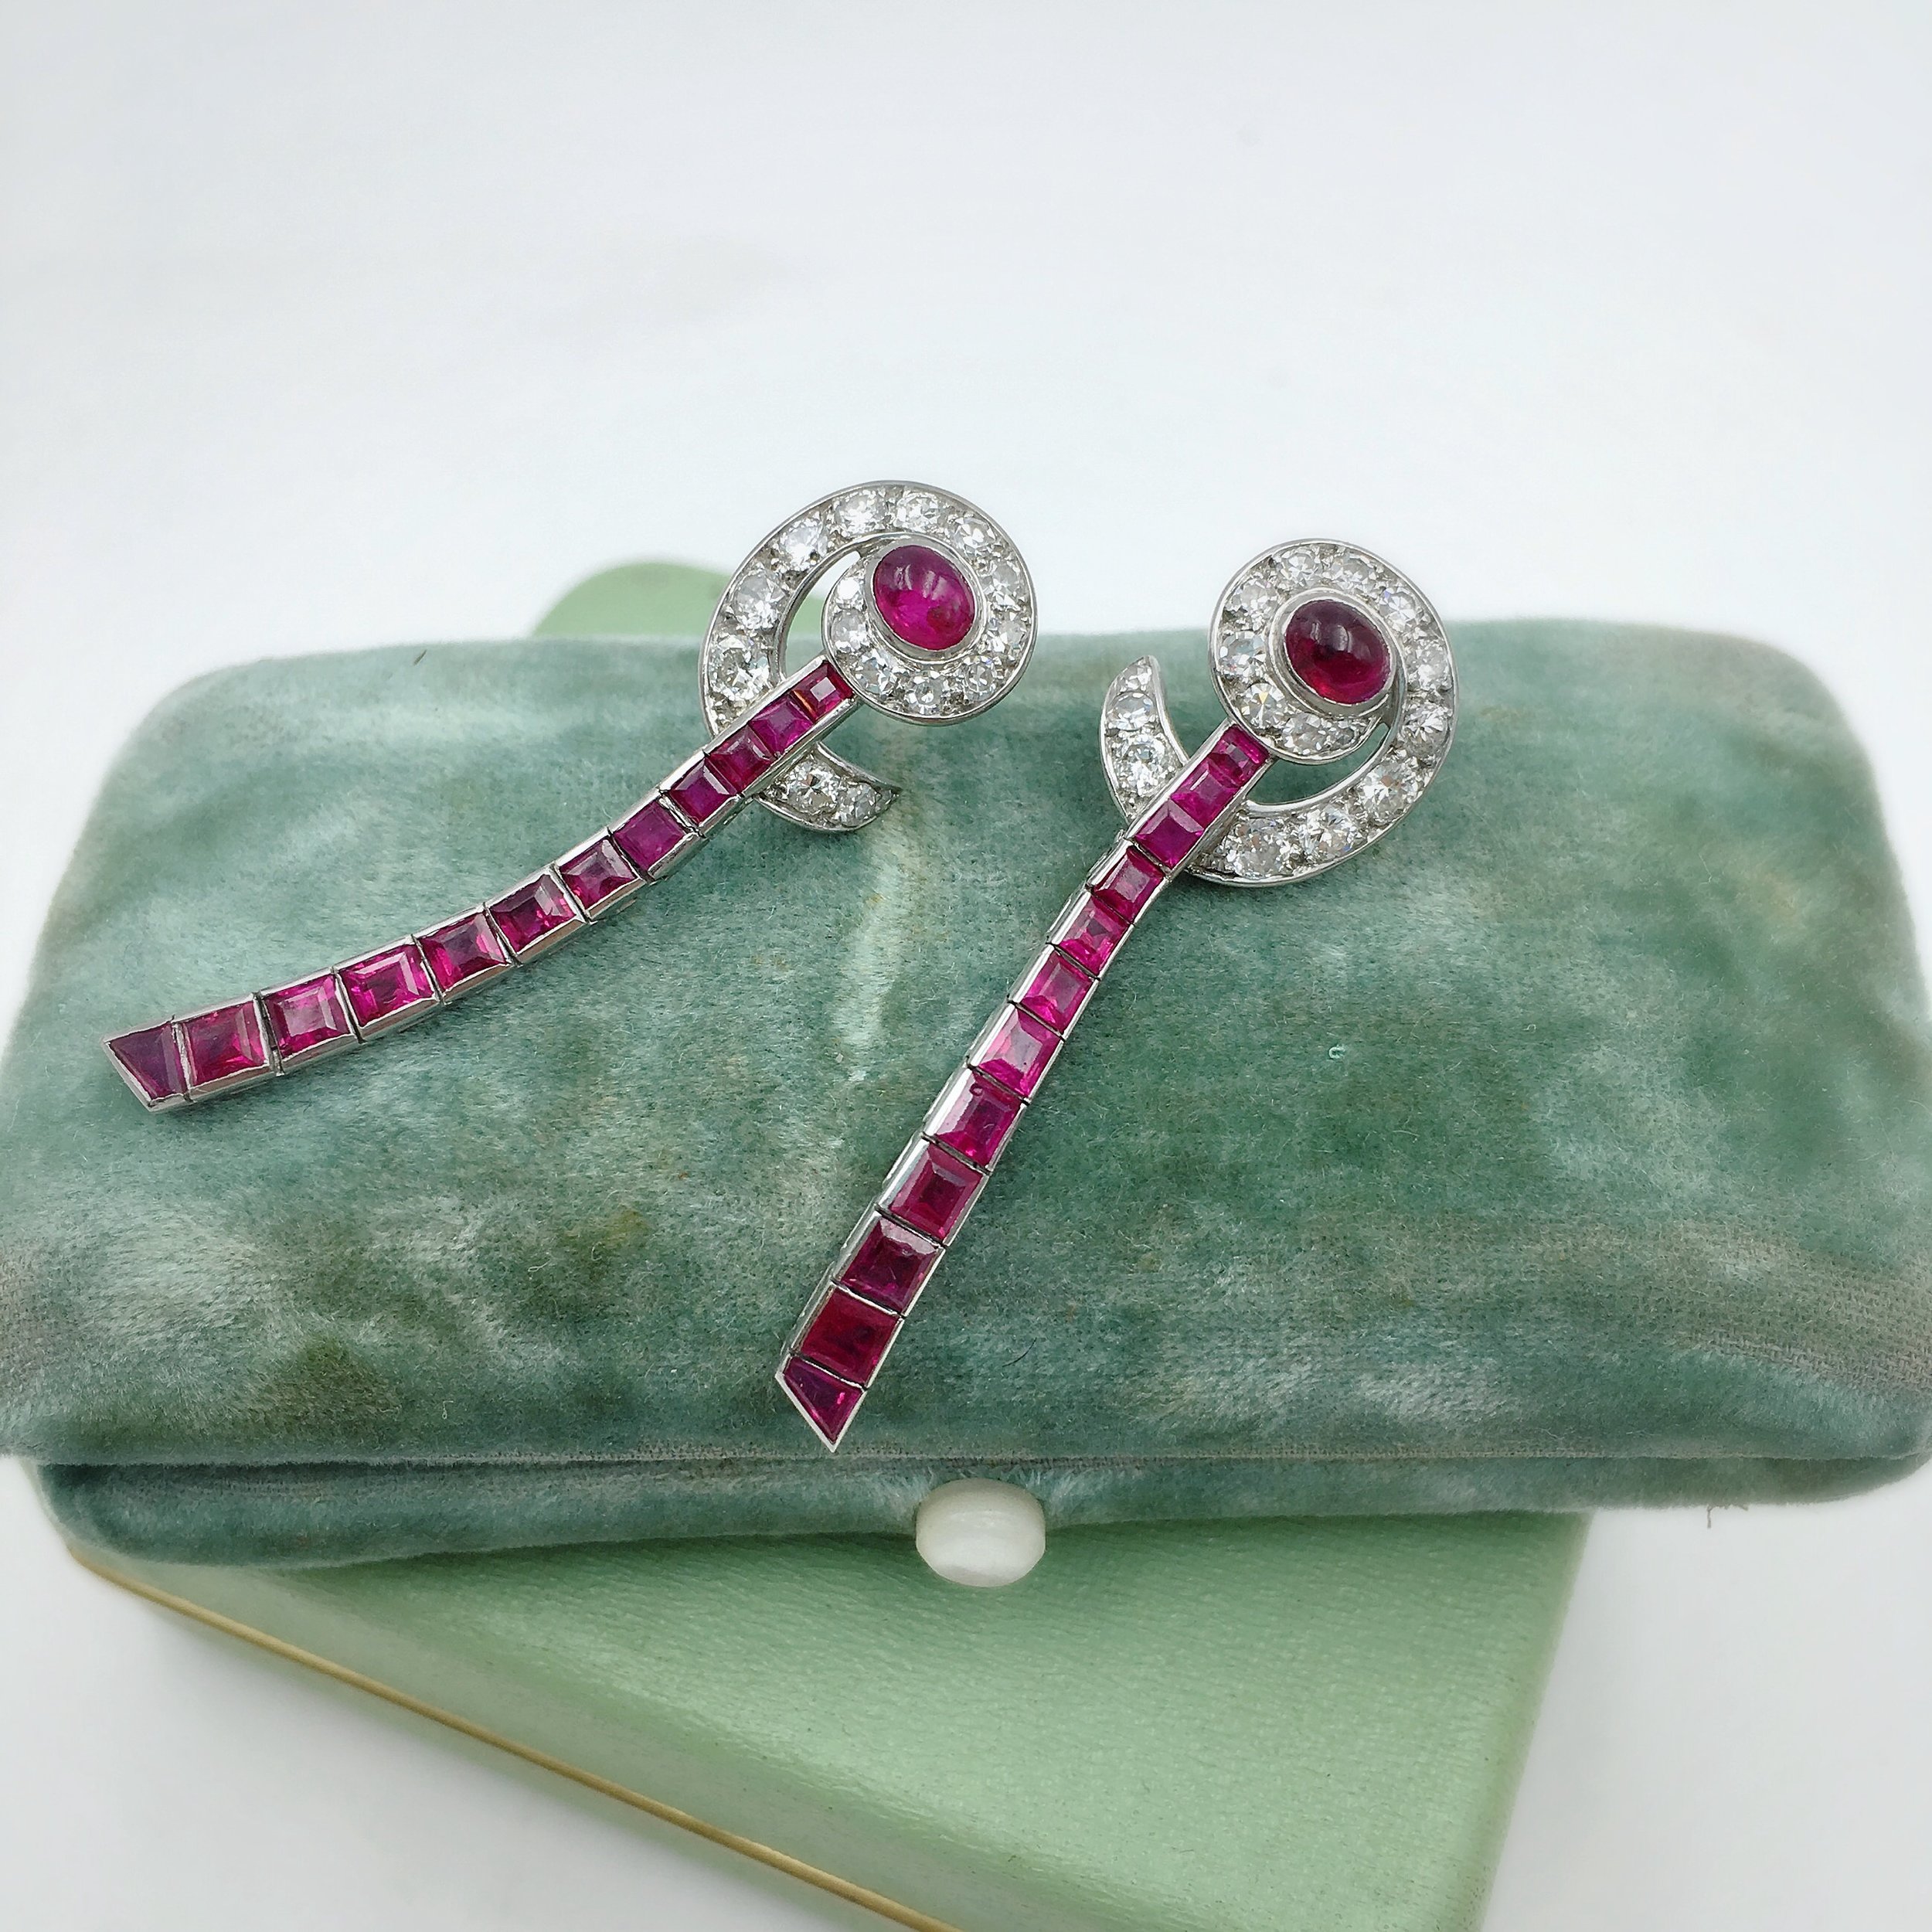 Art Deco diamond and ruby earrings, Reverie antique jewelry NYC